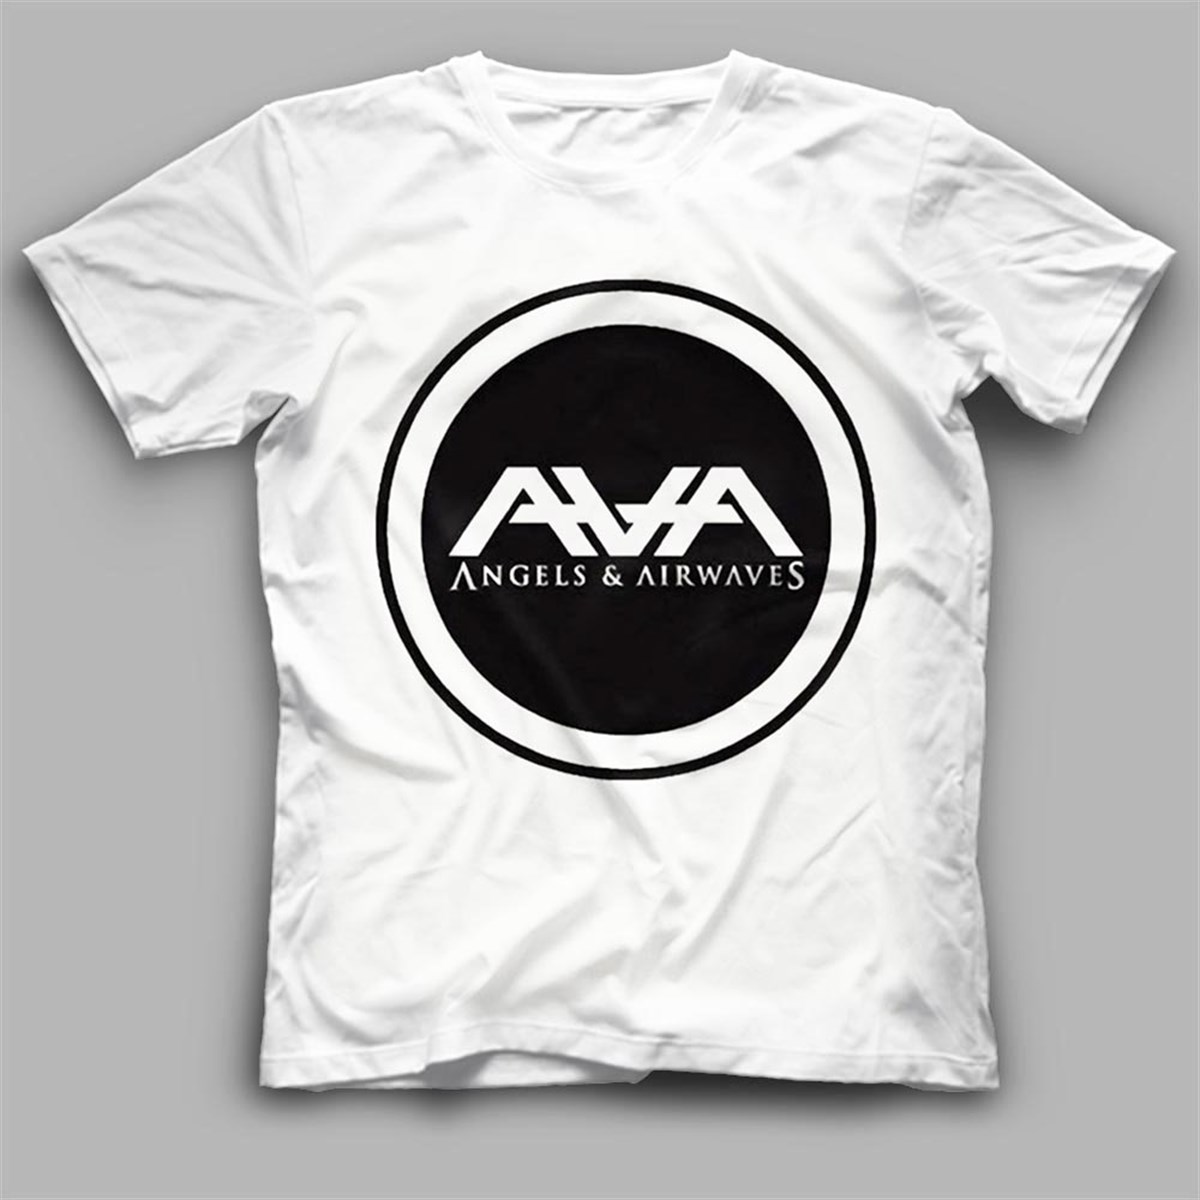 angels and airwaves t shirt